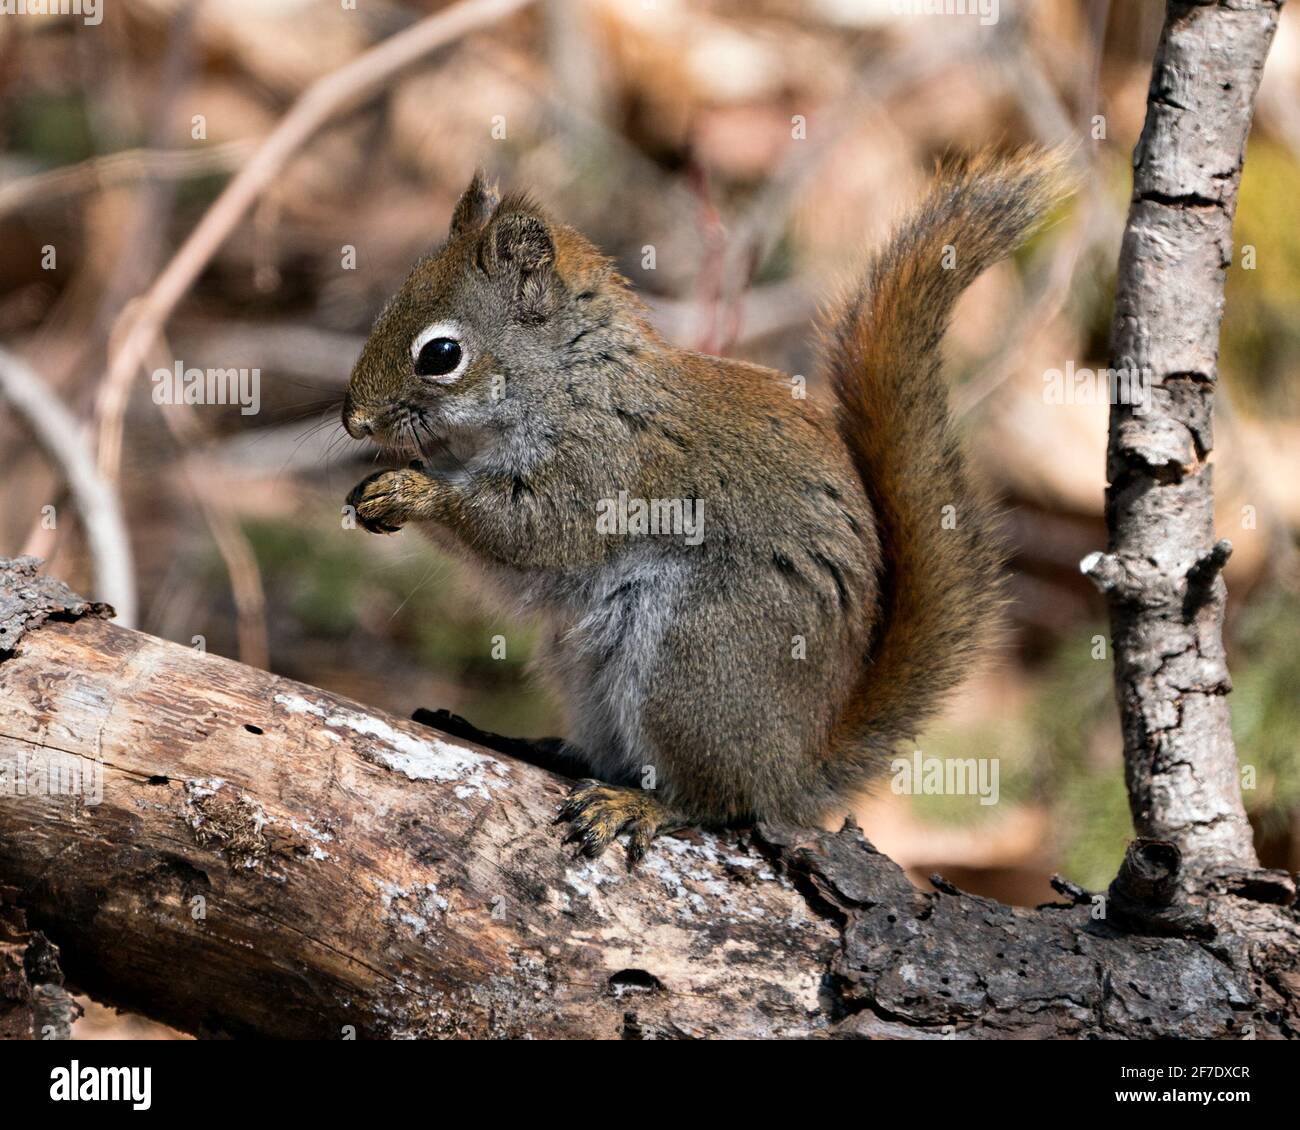 Squirrel close-up profile view sitting on a tree branch in the forest  displaying bushy tail, brown fur, nose, eyes, paws with a blur background. Stock Photo